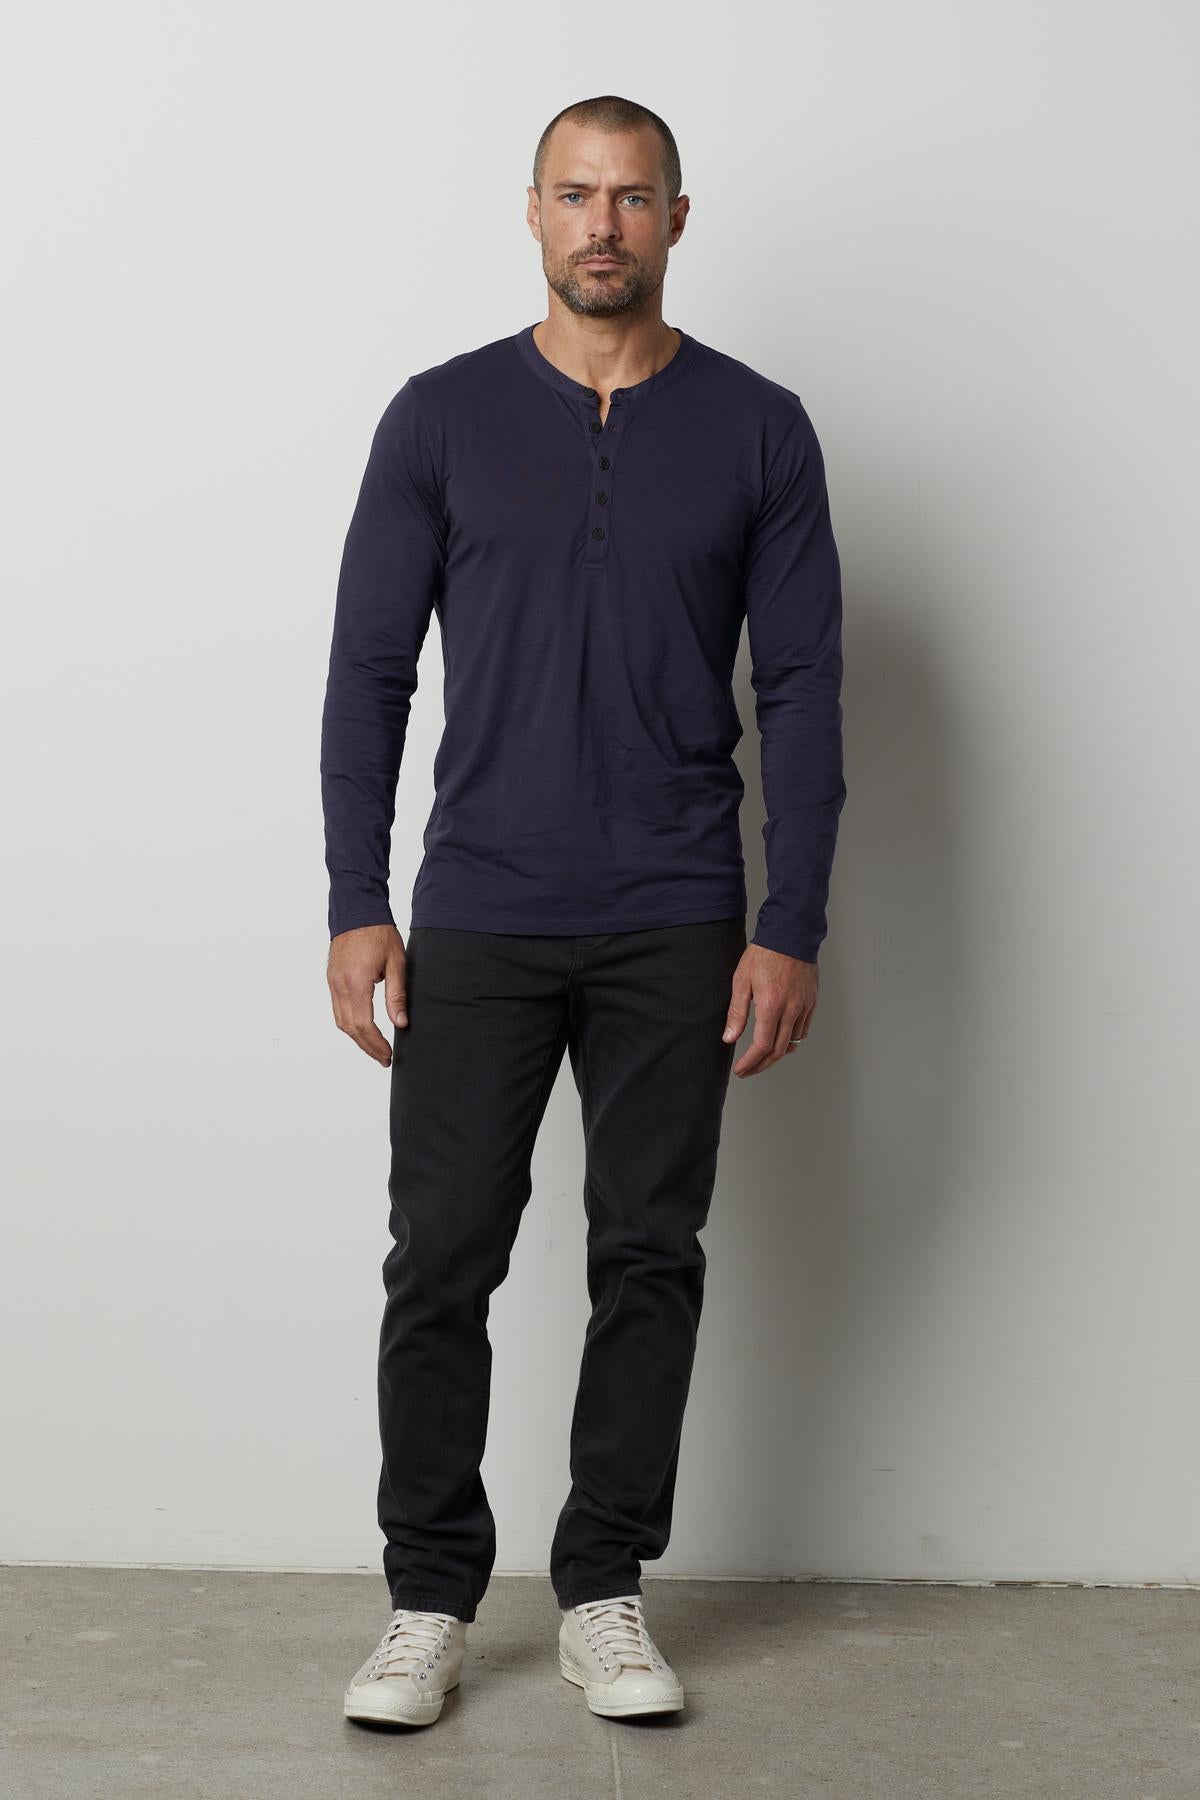 A man with a shaved head, wearing a long-sleeve lightweight navy ALVARO HENLEY by Velvet by Graham & Spencer, black jeans, and white sneakers, stands against a plain white background.-35607611113665